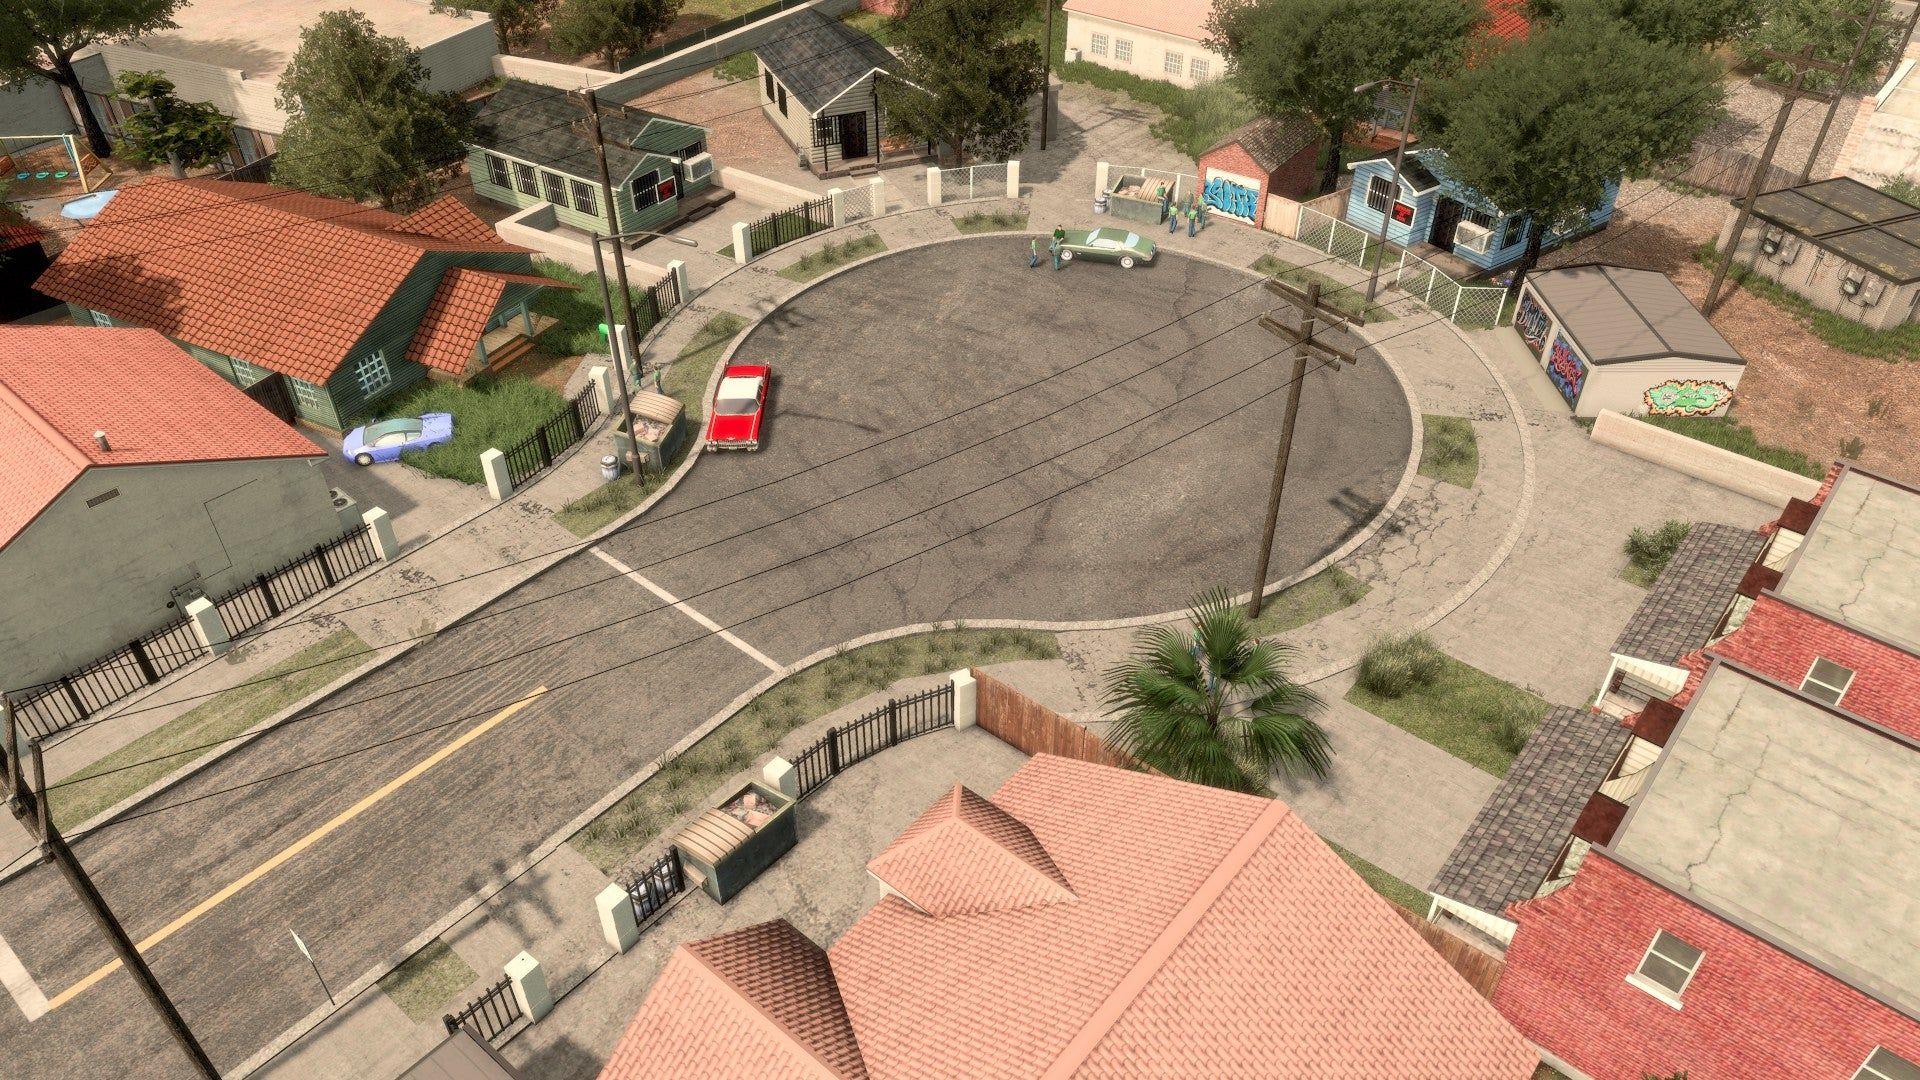 Grove Street Wallpapers - Top Free Grove Street Backgrounds